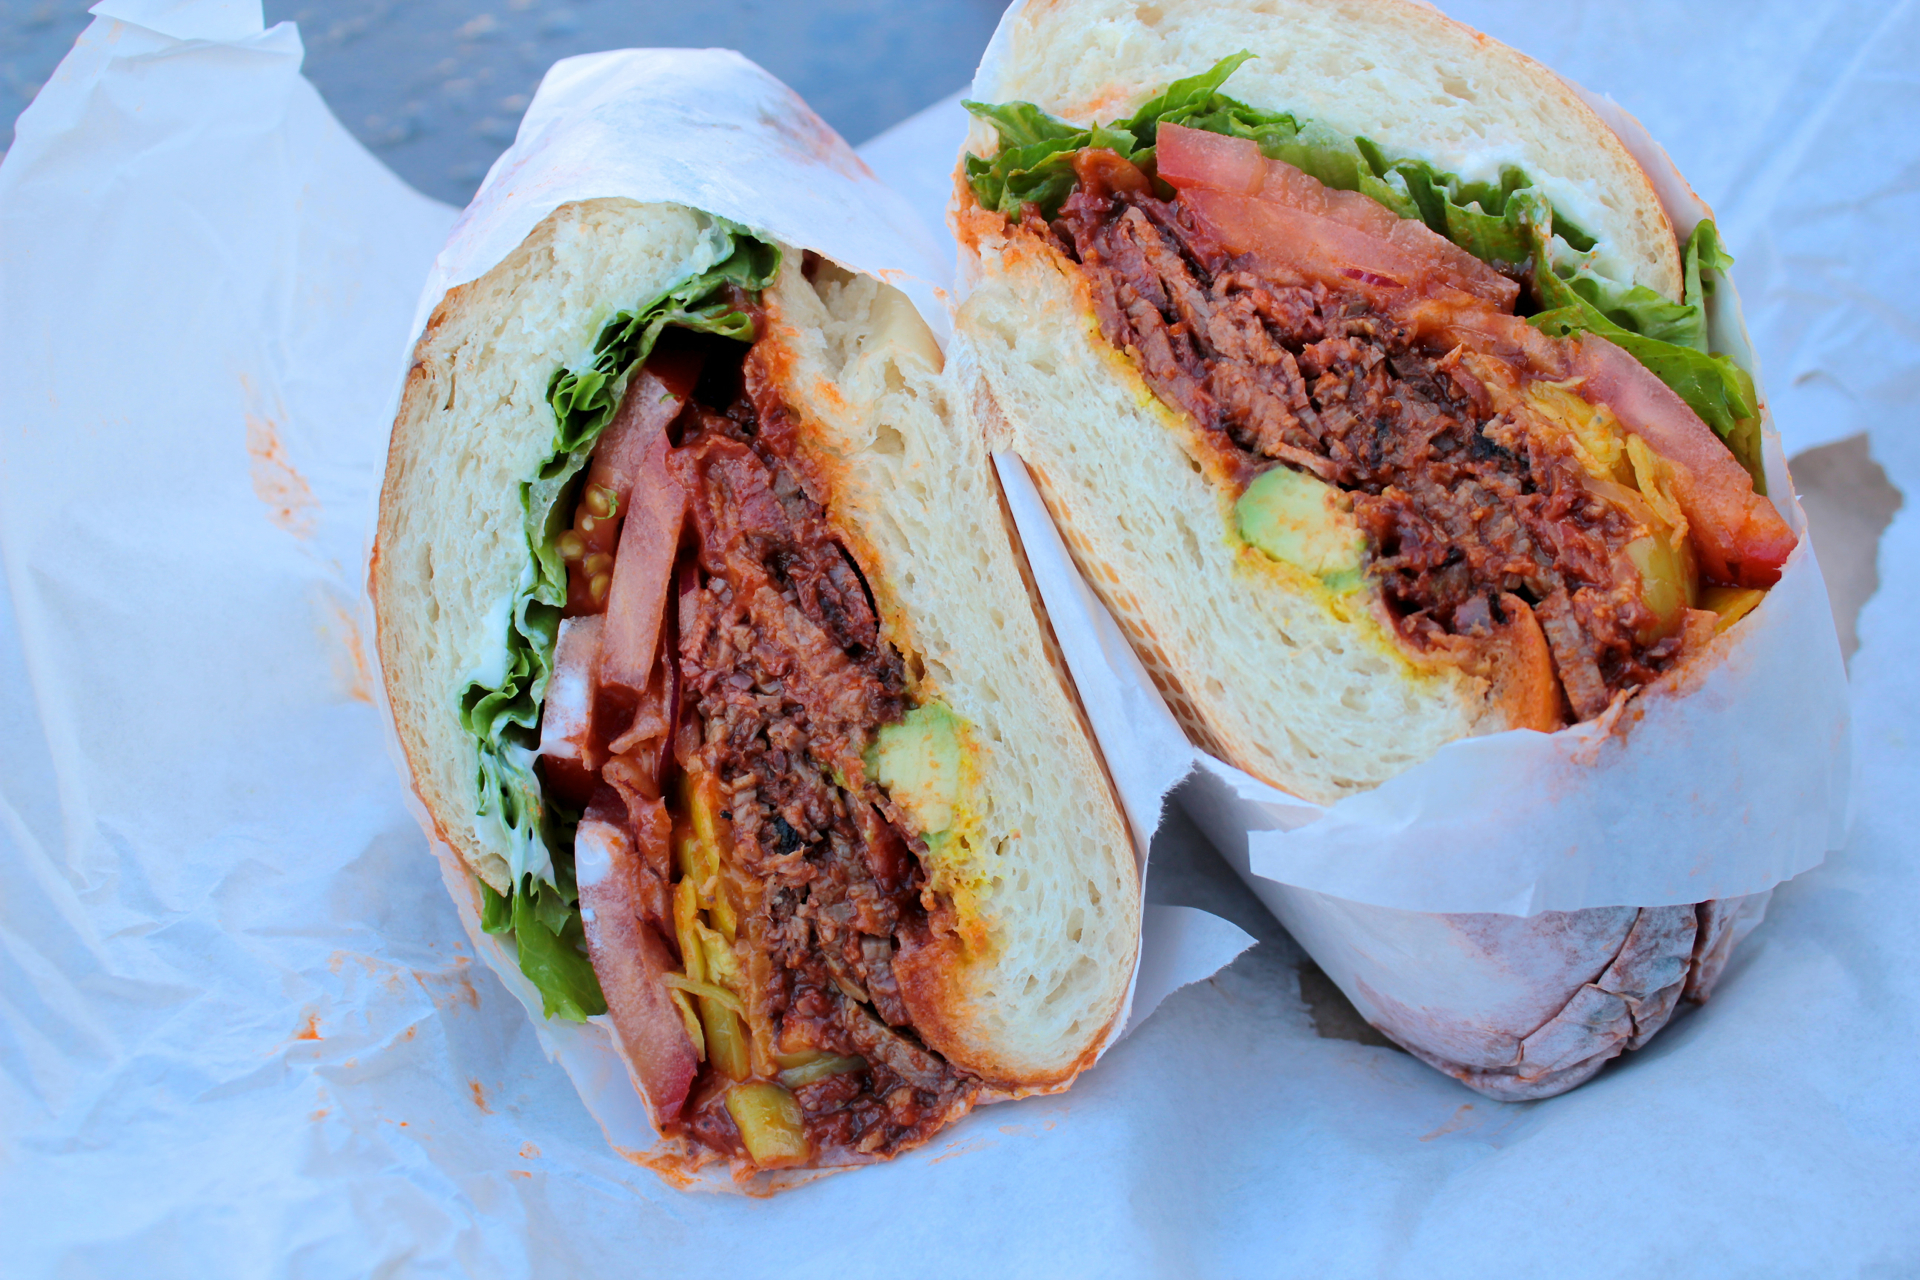 The Super Hero sandwich features Tri-Tip with barbecue sauce, bacon, cheddar cheese and avocado.